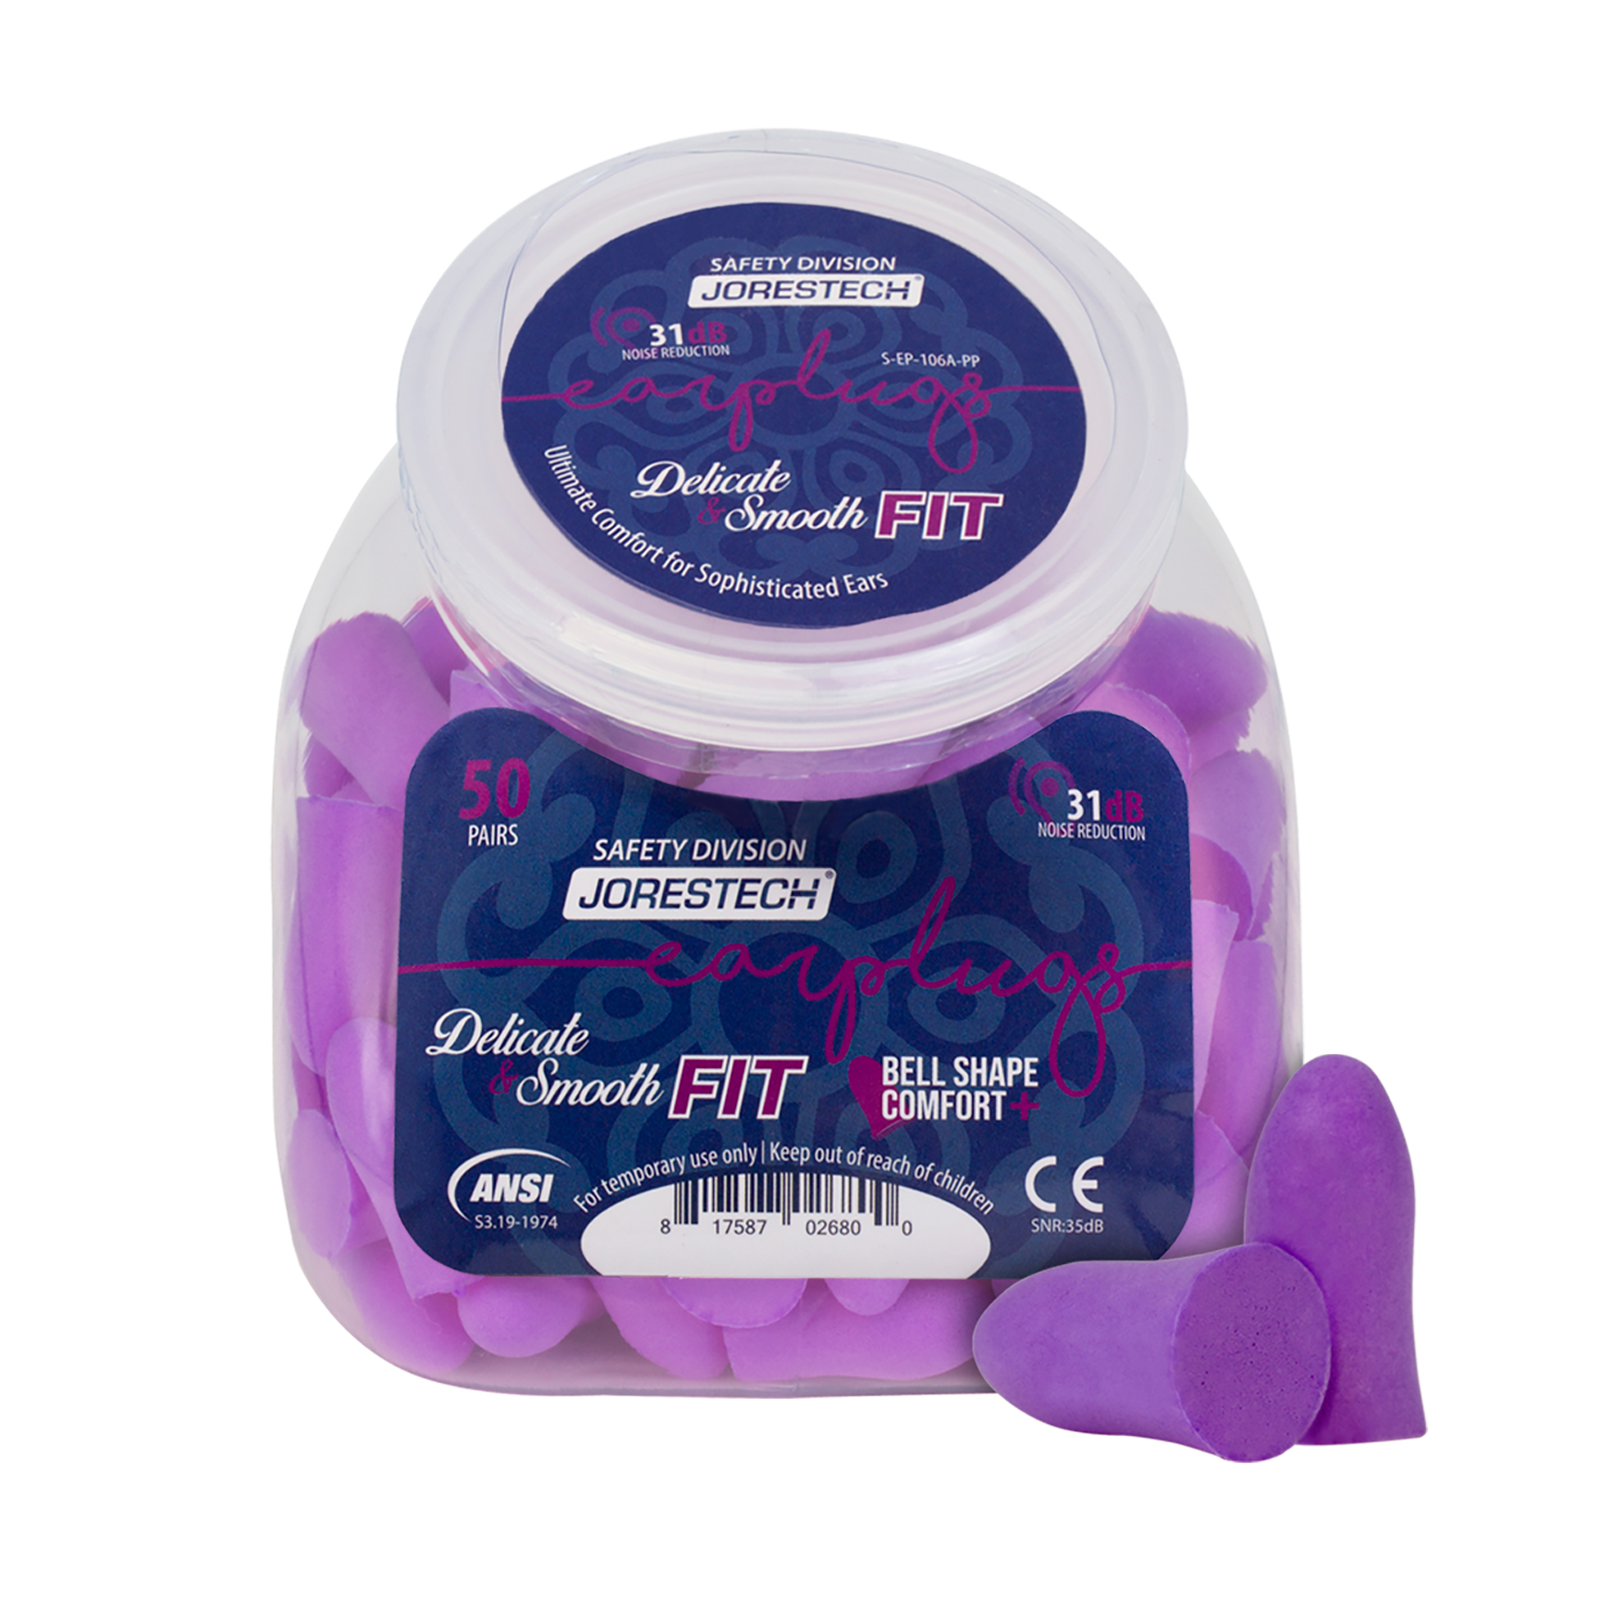 One transparent container filled with 50 pairs of purple JORESTECH ear plugs. 2 soft foam ear plugs are next to the container 